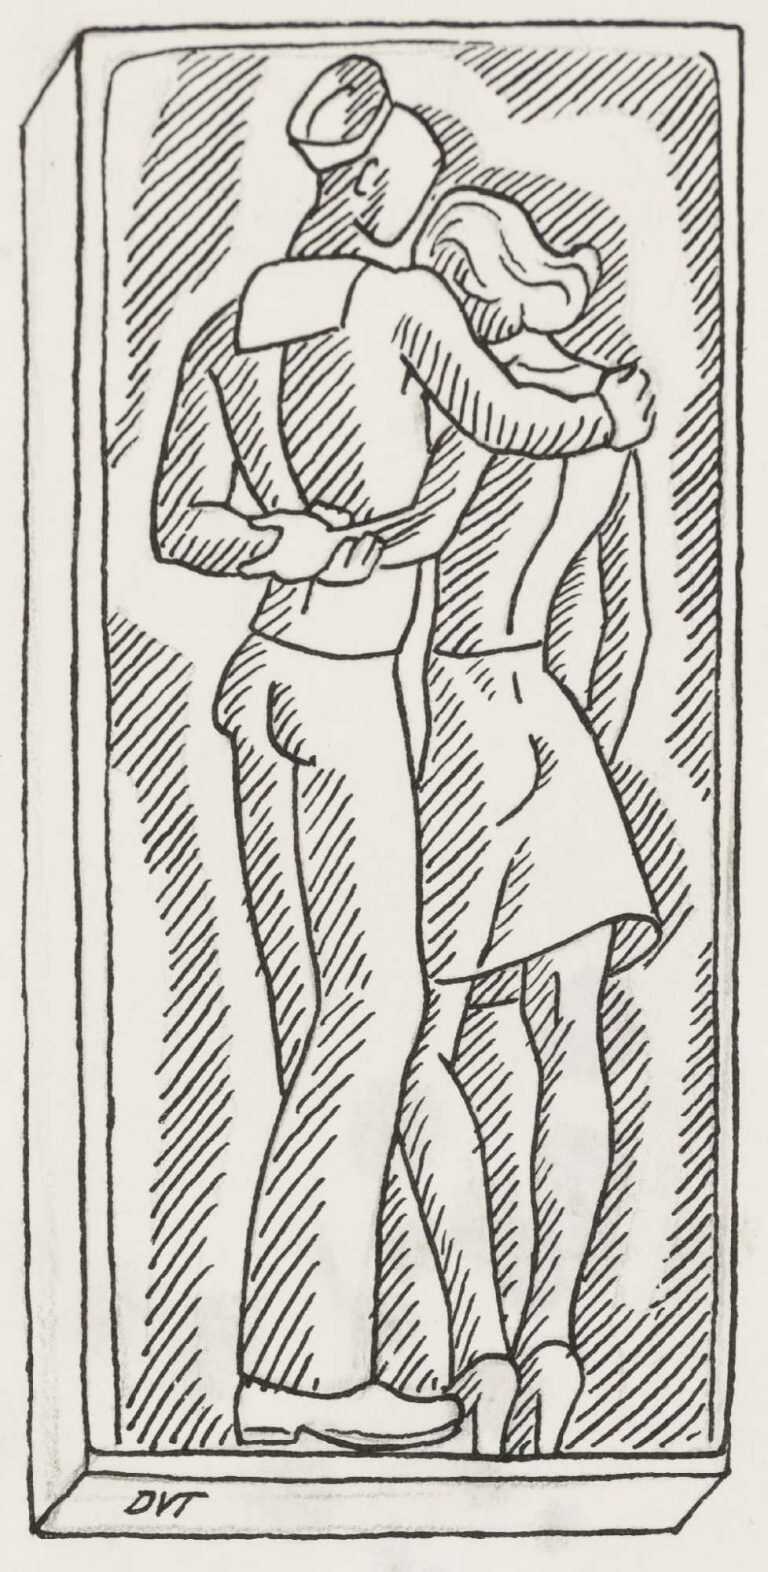 Drawing By Dudley Vaill Talcott: [sailor & Woman] At Childs Gallery